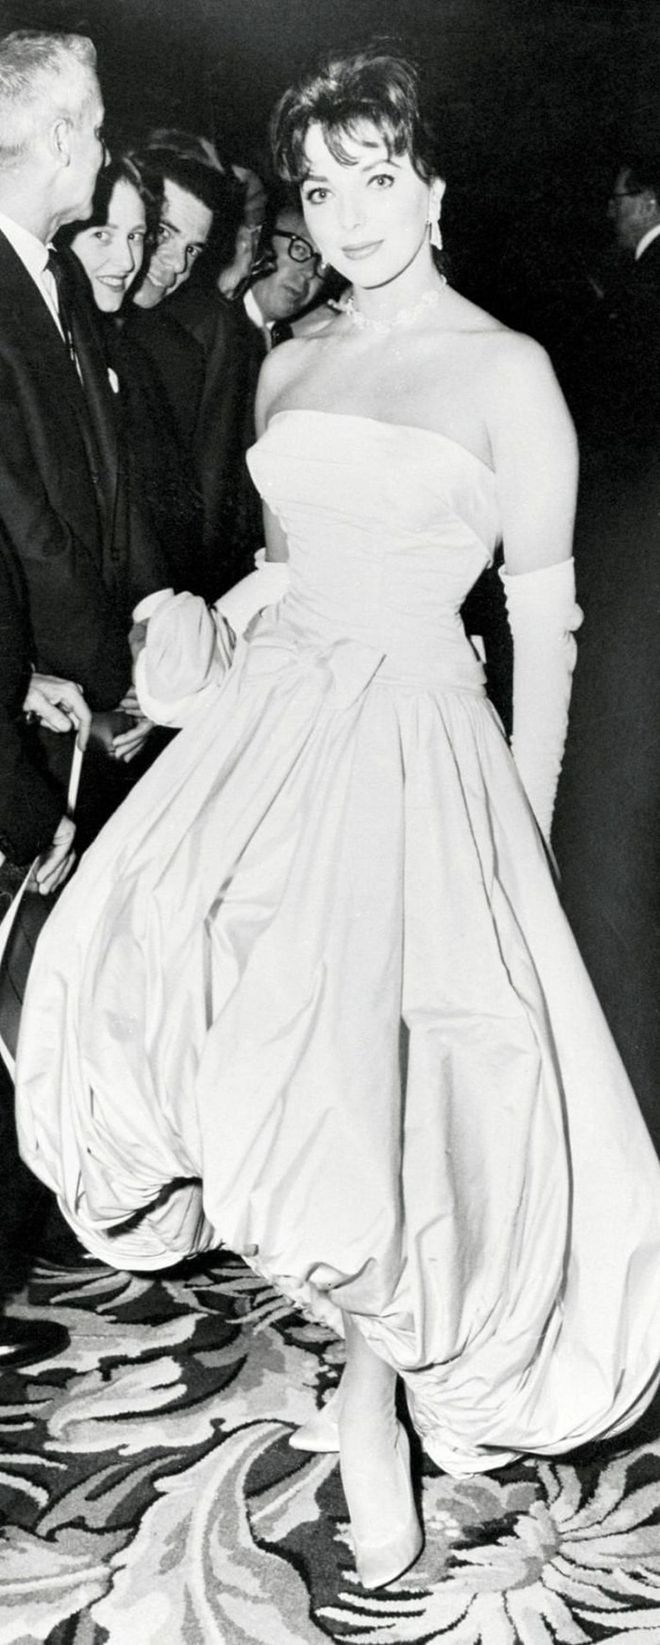 Joan Collins clearly turned heads in this bubble hem gown—and in the '50s no formal look was complete without elbow-length gloves.